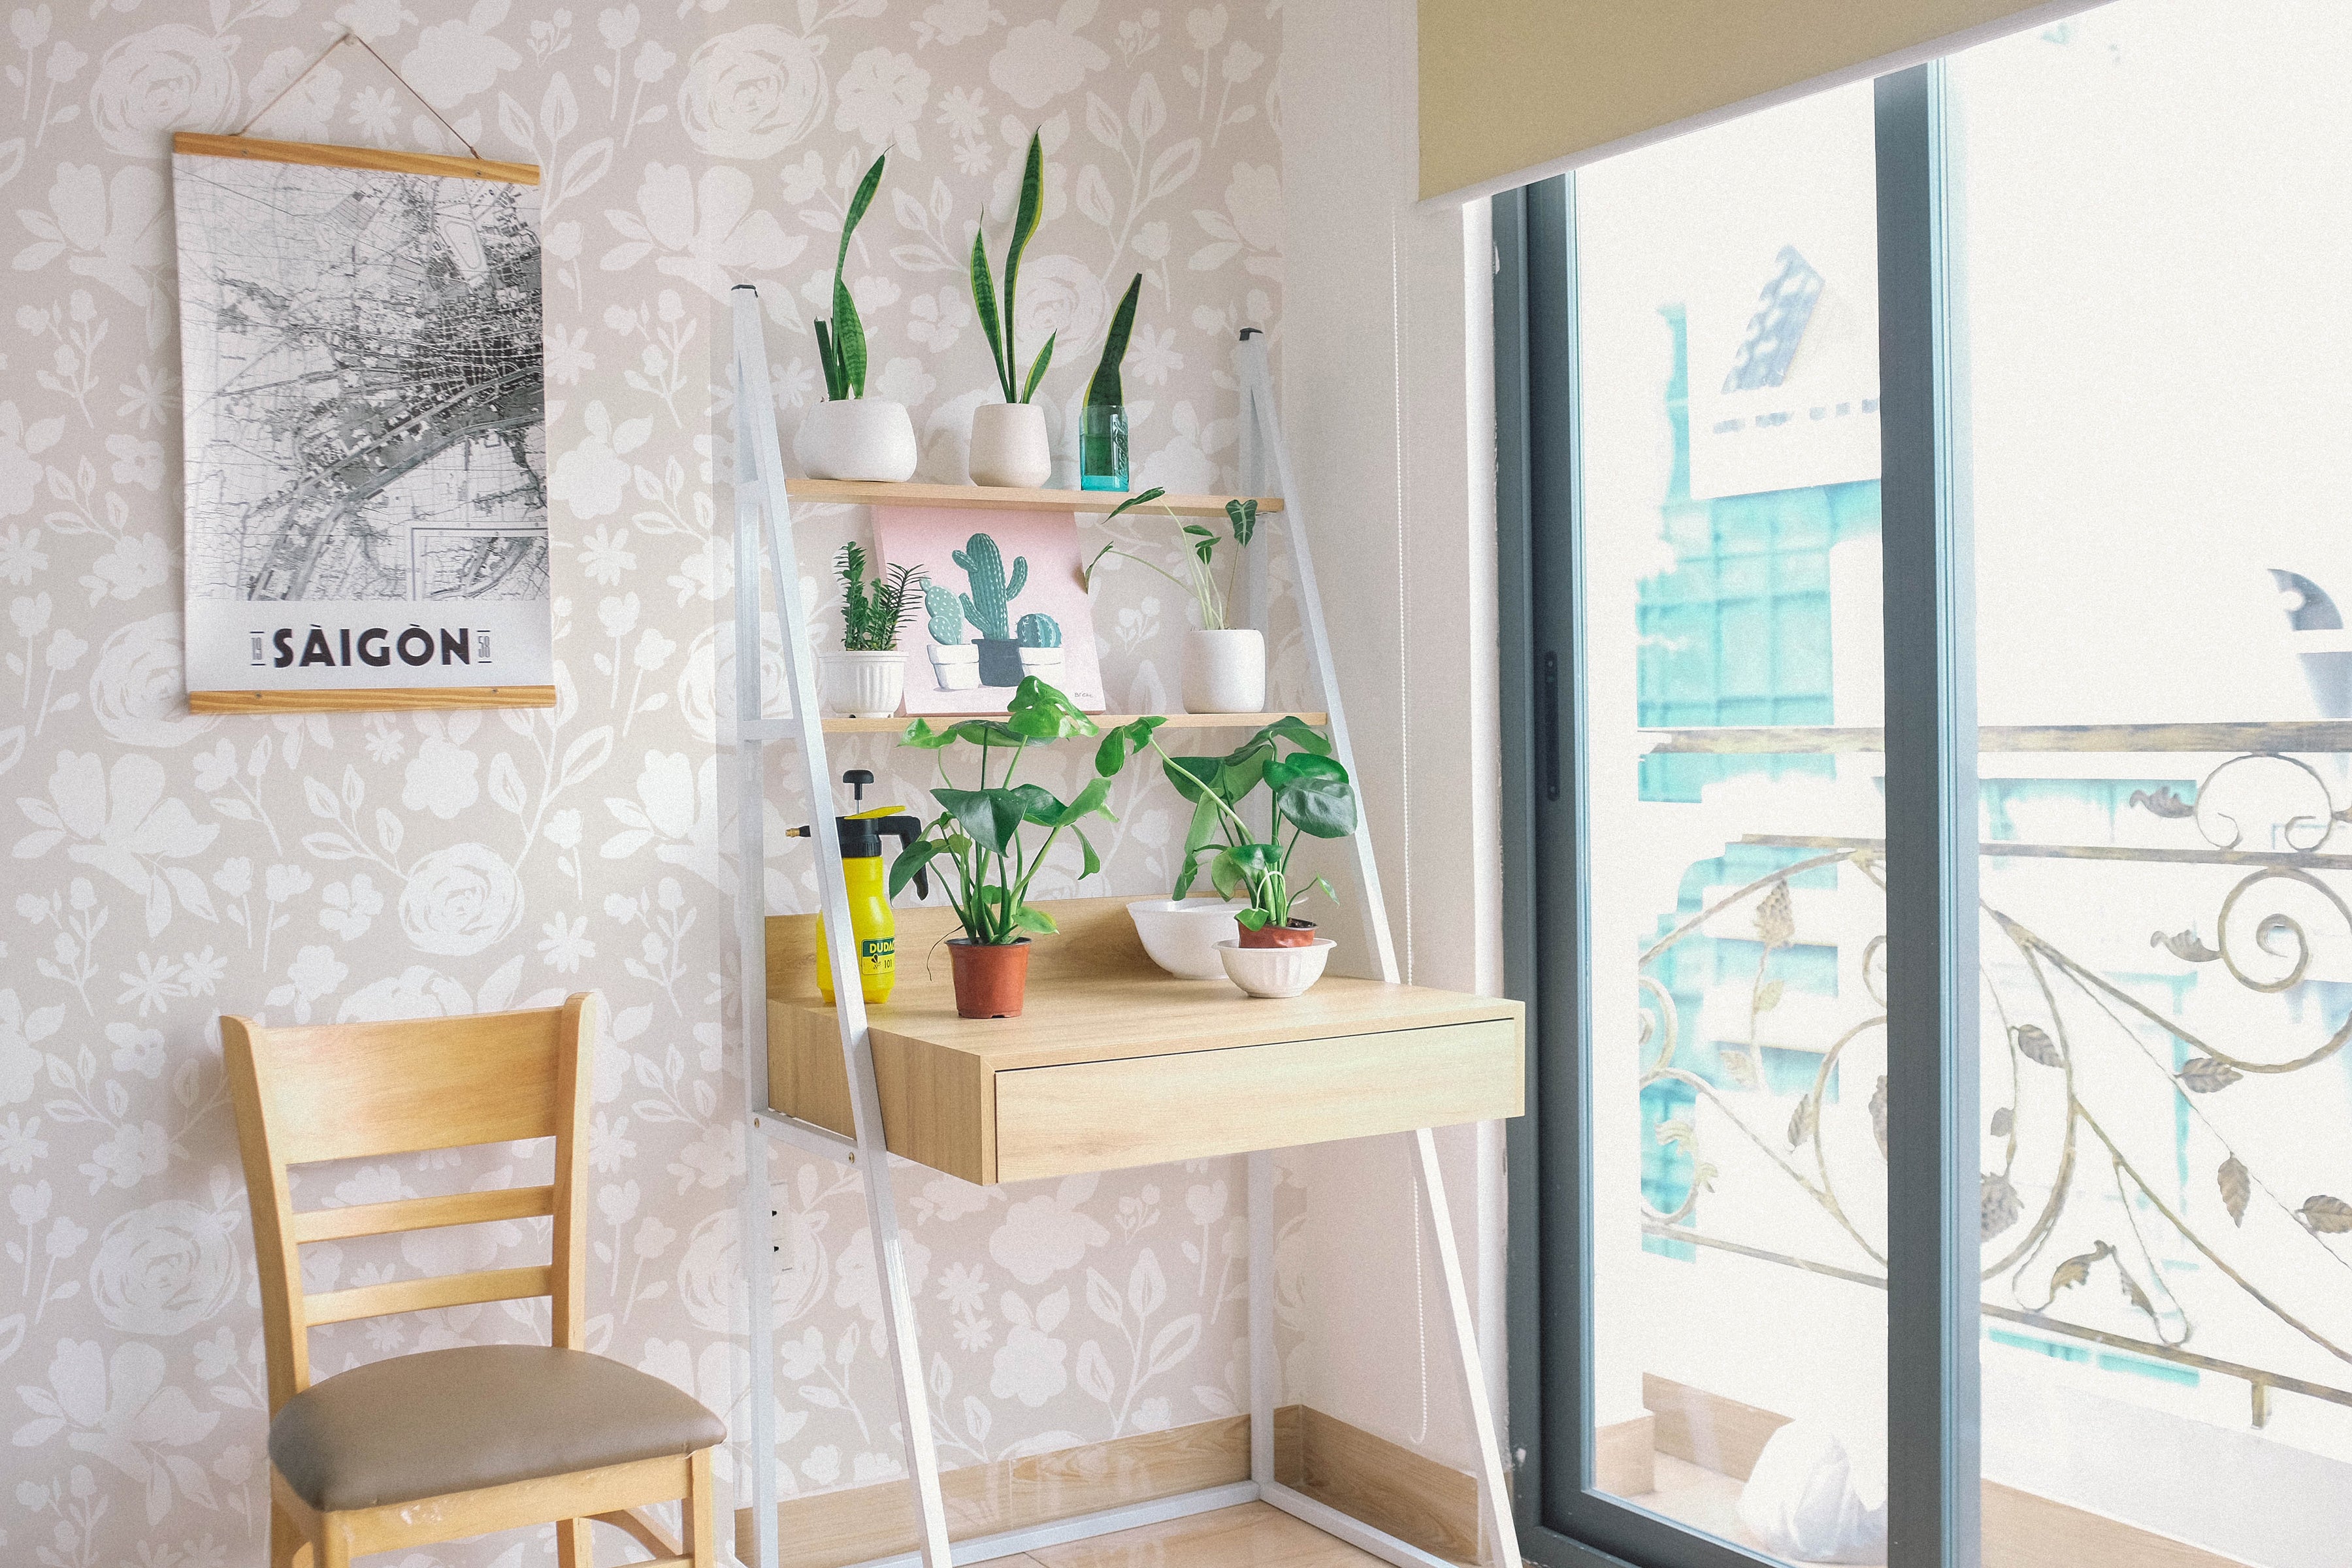 A cozy corner of a room featuring the Silhouette Floral Wallpaper in Faded Linen, adorned with a light wooden chair and a white shelf housing an array of potted green plants. A framed map of Saigon hangs on the wall, complementing the wallpaper's soft floral design.